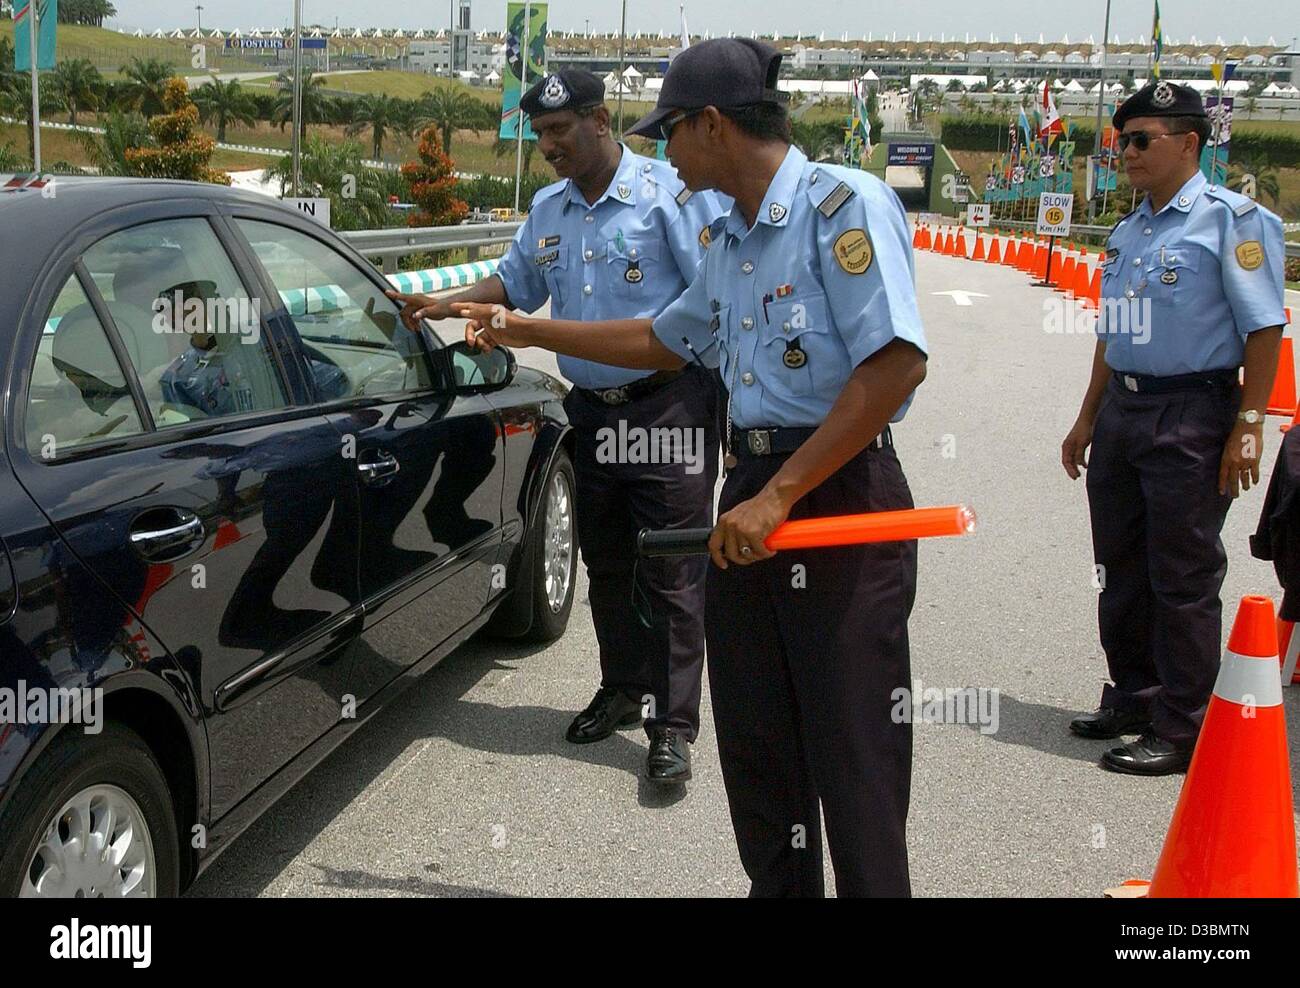 (dpa) - Malayan security forces conduct a security check on a car at the entrance to the formula one race track in Kuala Lumpur, Malaysia, 21 March 2003.  Security has been increased since the start of the war with Iraq. The formula one grand prix race in Malaysia is the second race of the season an Stock Photo